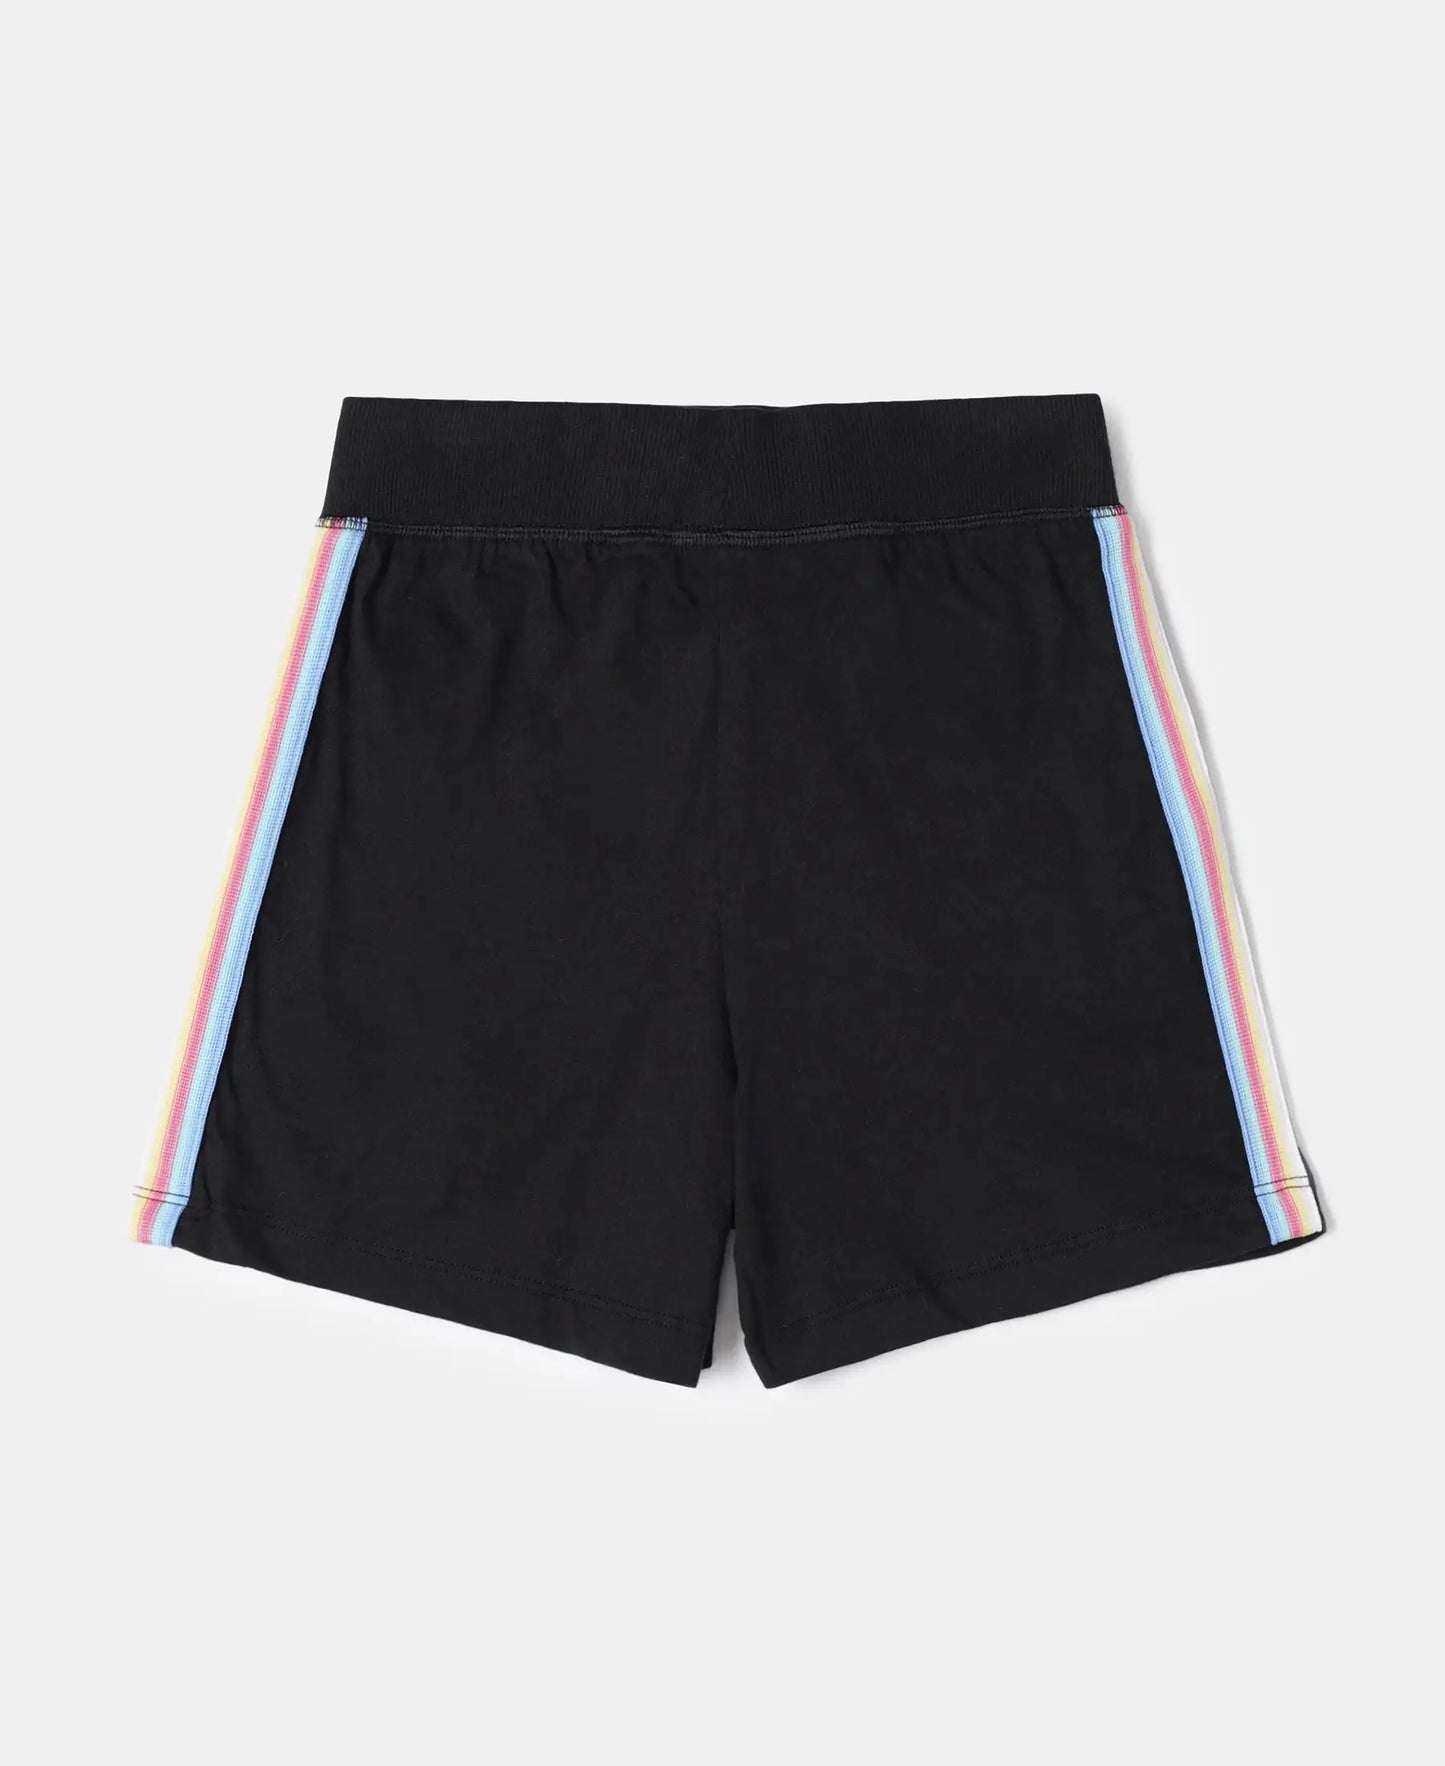 Super Combed Cotton Solid Shorts with Side Taping - Black-2